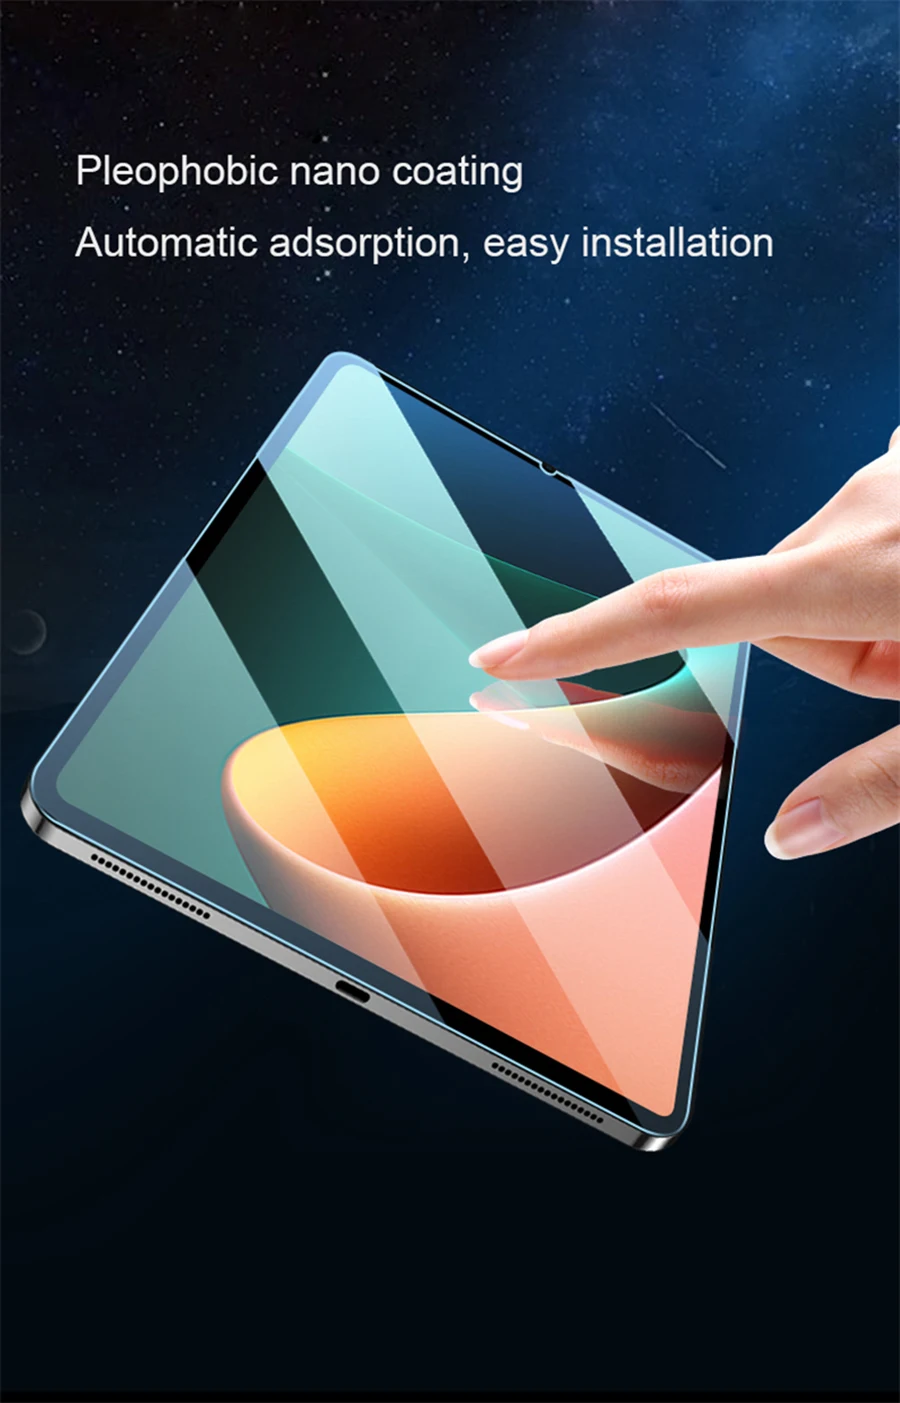 3PCS For Xiaomi Mi Pad 5 Pro Tempered Glass Tablet Protective Film 9H Xiomi Mipad 5 Pro MiPad5 Screen Protector Glass 20213PCS For Xiaomi Mi Pad 5 Pro Tempered Glass Tablet Protective Film 9H Xiomi Mipad 5 Pro MiPad5 Screen Protector Glass 2021 bluetooth keyboard for samsung tablet